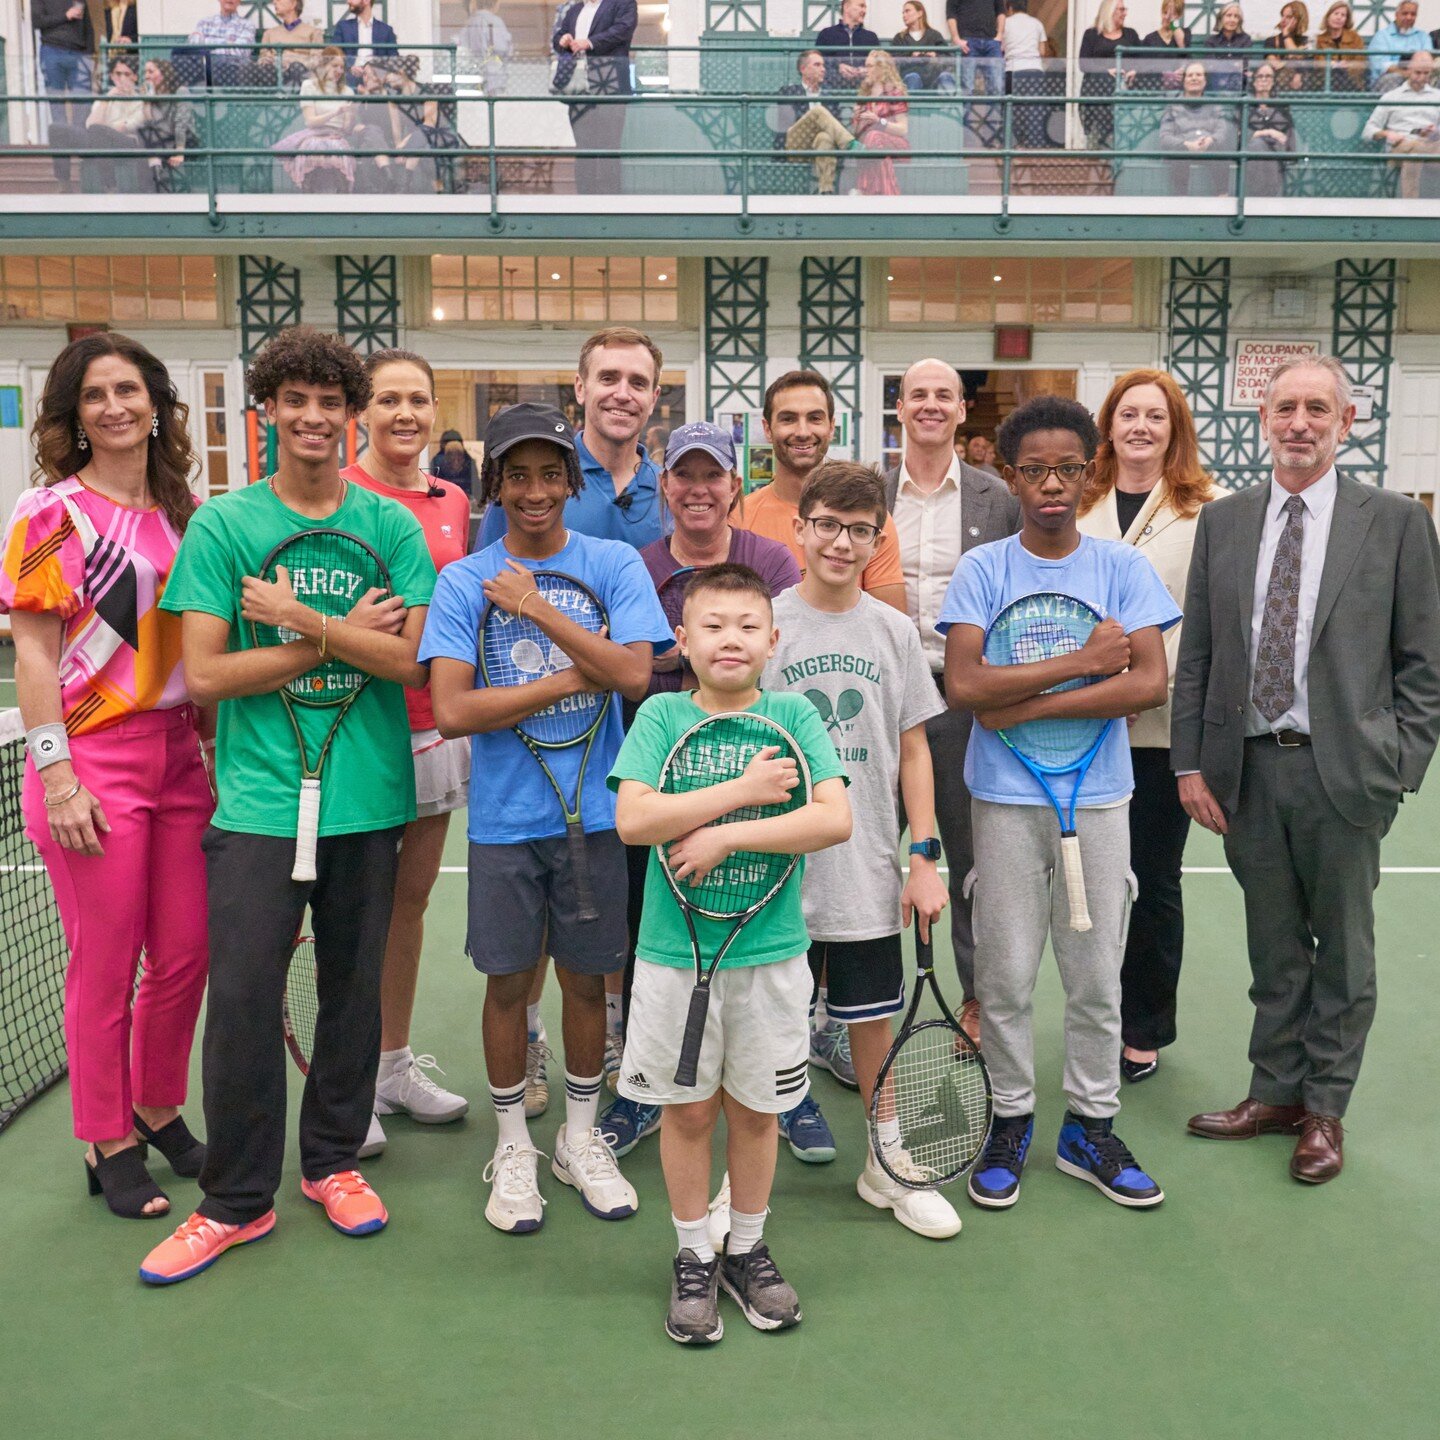 Check out these moments from our first fundraising event of the year: The Exhibition!

The highlight of the evening was seeing WTA doubles legends @liezelhornhuber and @lisamraymond team up for doubles with @usta board First Vice President Brian Vaha